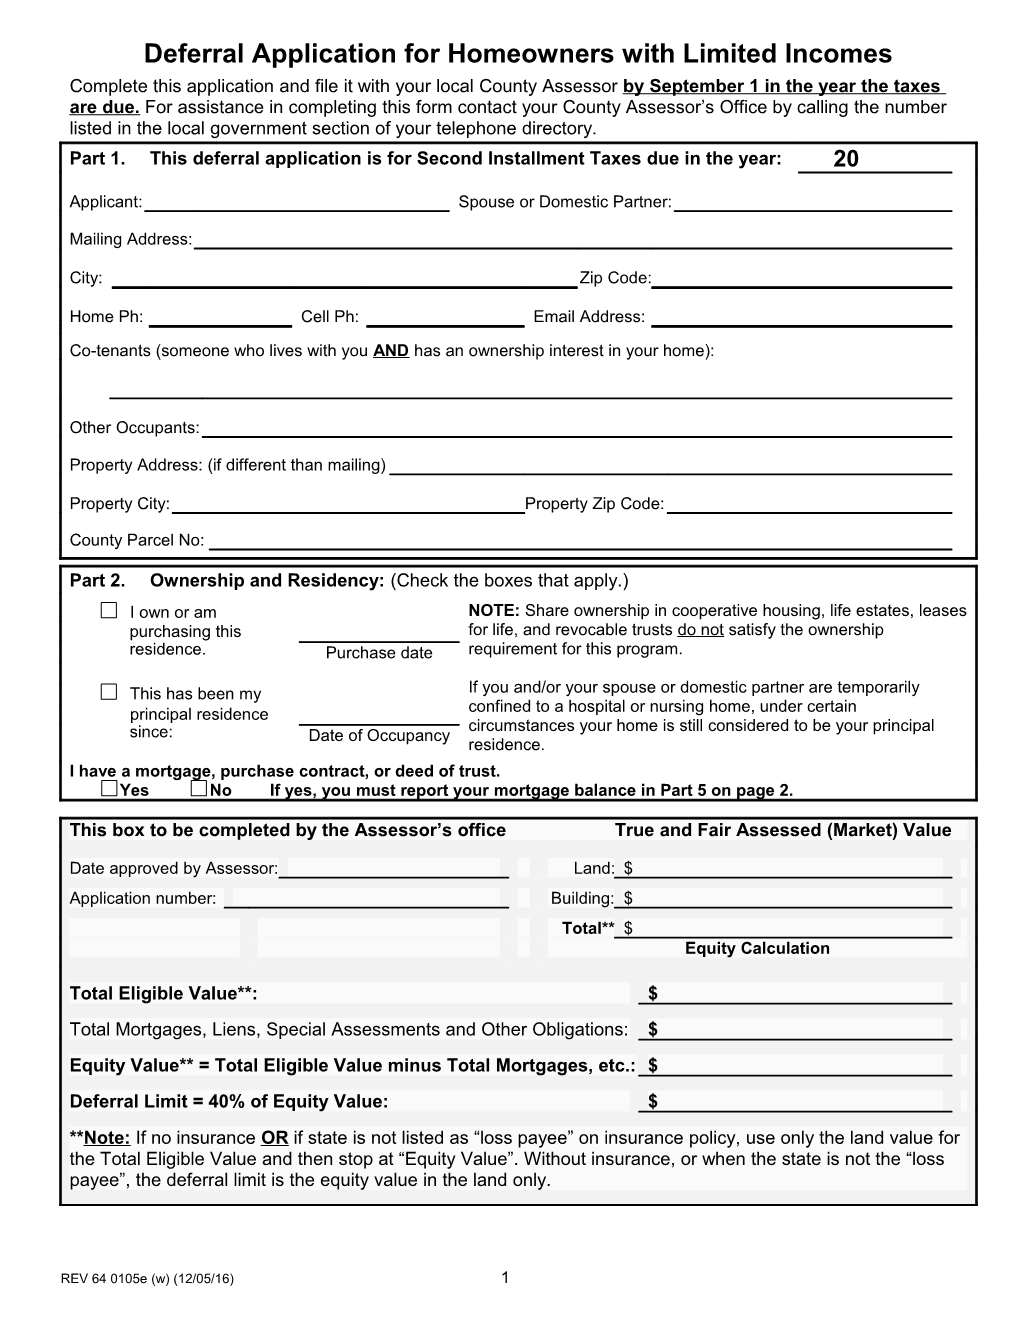 Deferral Application For Homeowners With Limited Incomes (REV 64 0105)